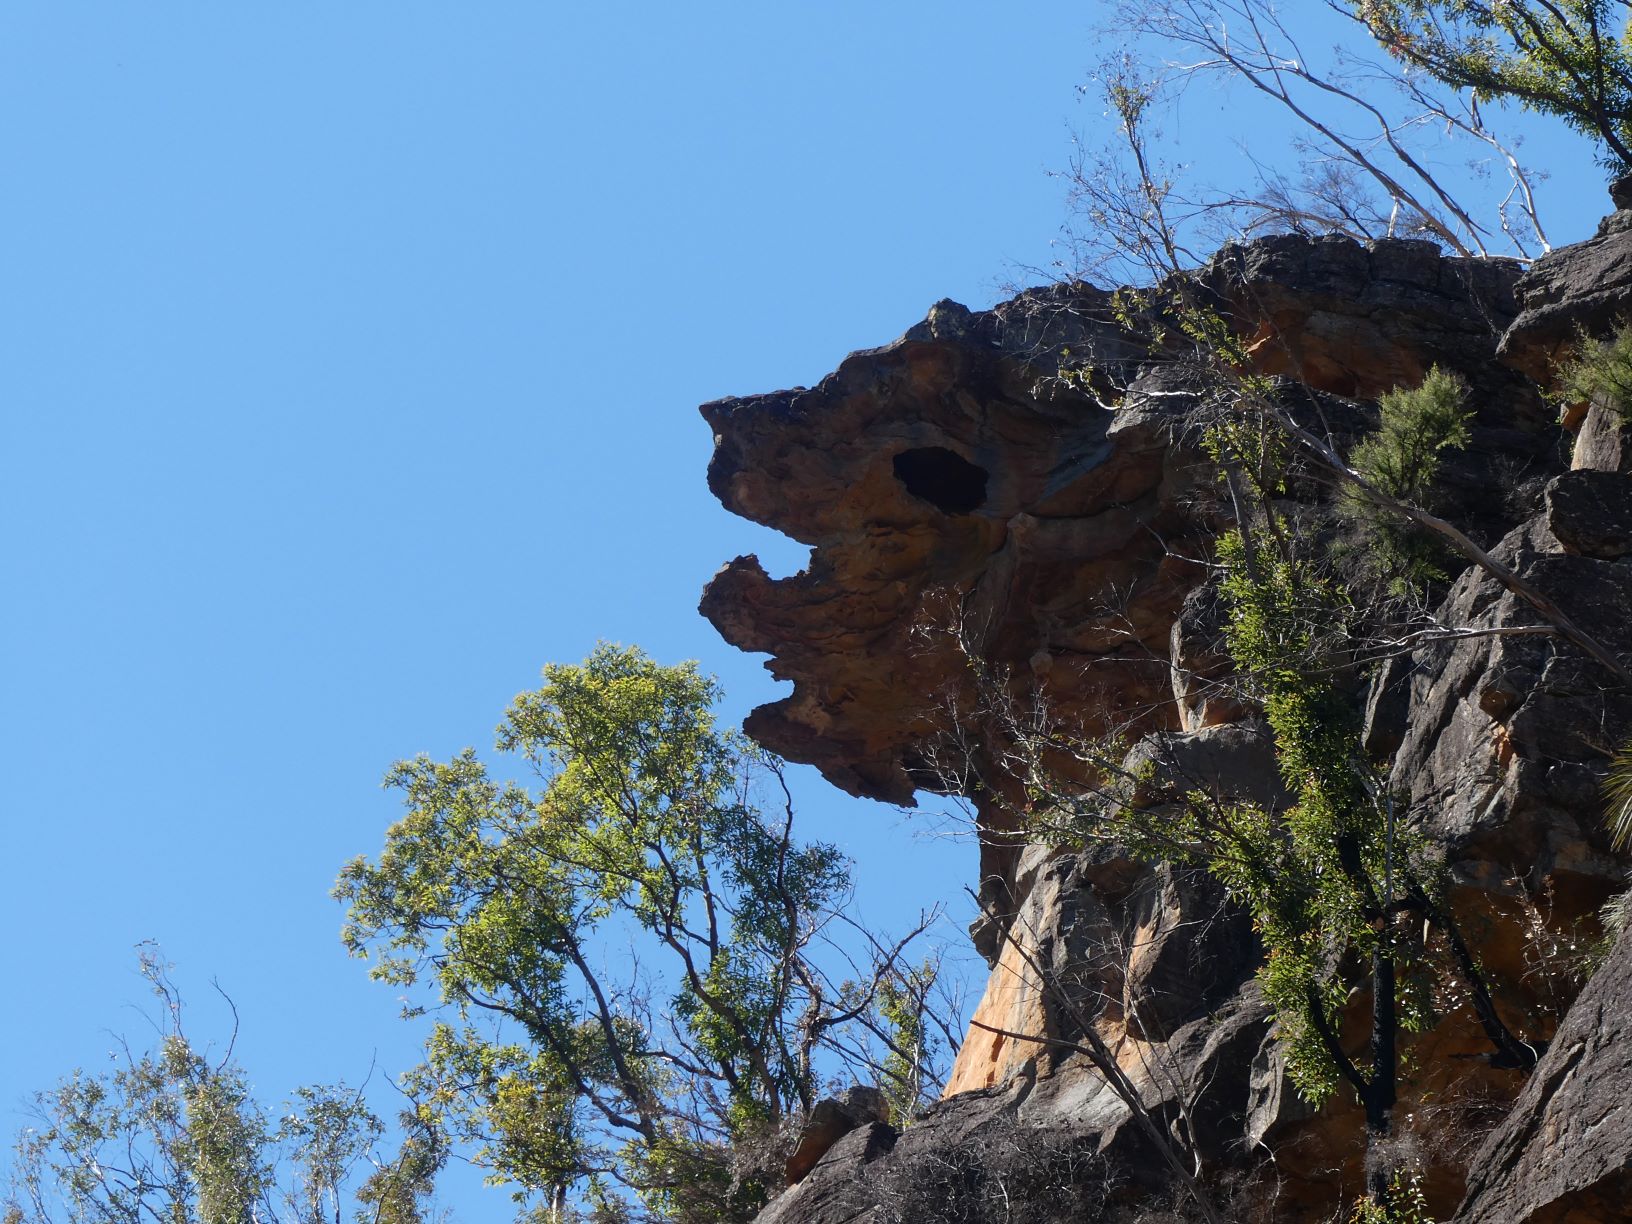 Overhanging Rock plate resembles a bearded animal